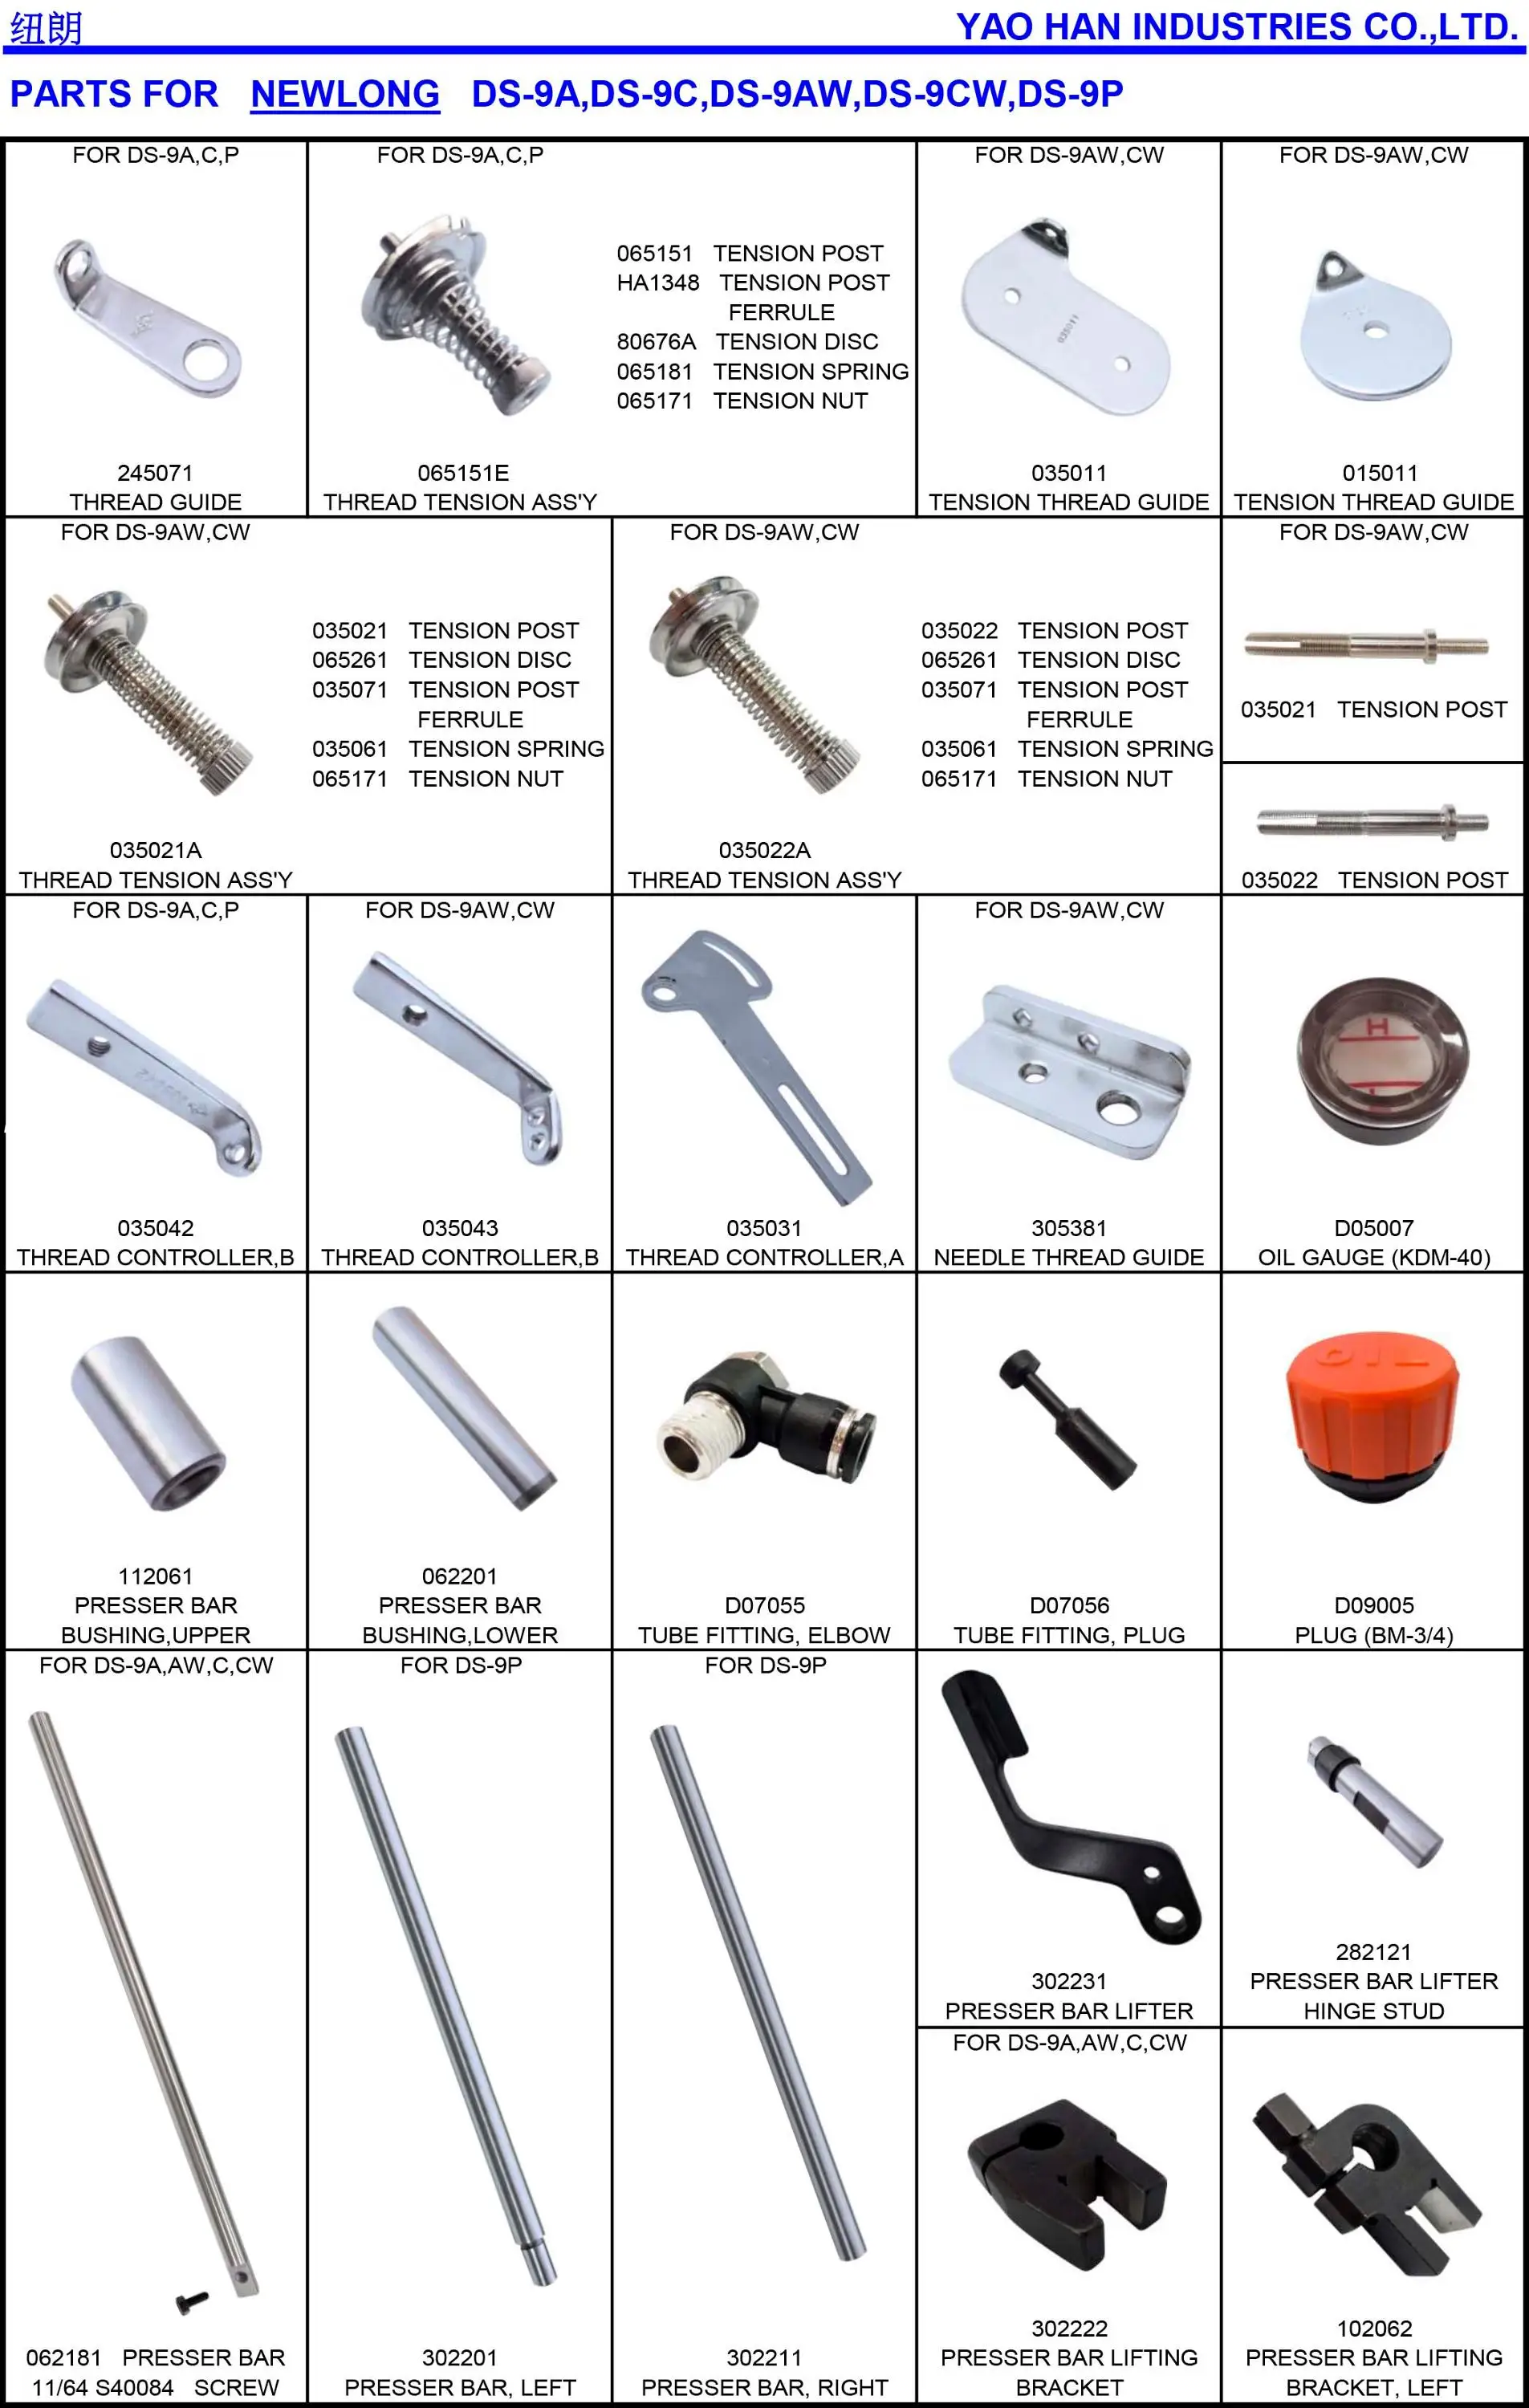 Taiwan Made Newlong Spare Parts Feed Bar Ass Y For Ds 9c Cw P Buy Feed Bar Ass Y Ds 9c Product On Alibaba Com